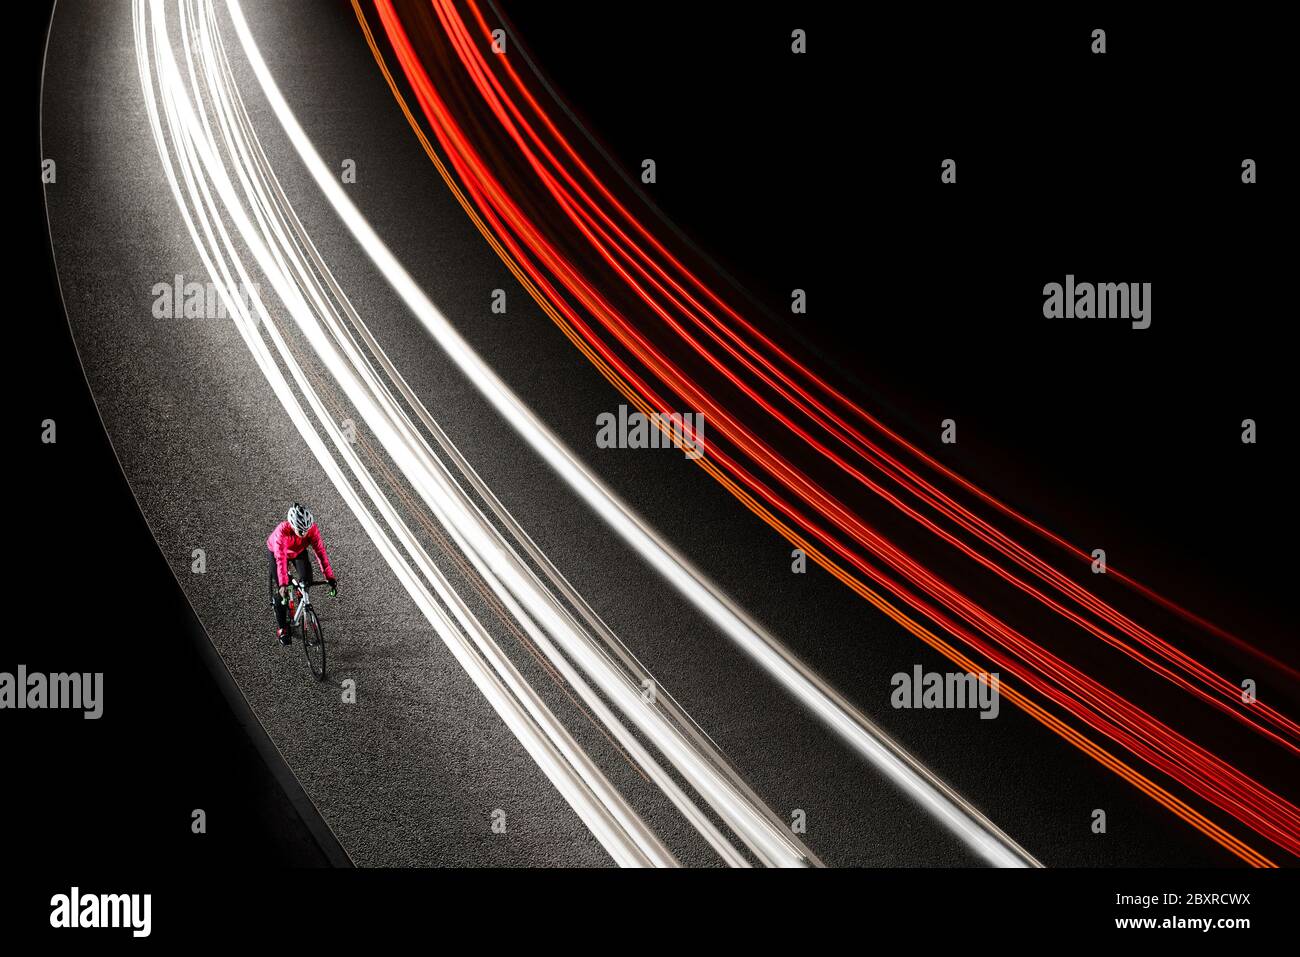 Woman Cyclist in Bright Pink Jacket Riding the Bike on the Night Road with Cars Light Trails. Healthy Lifestyle and Urban Active Sport Concept. Stock Photo